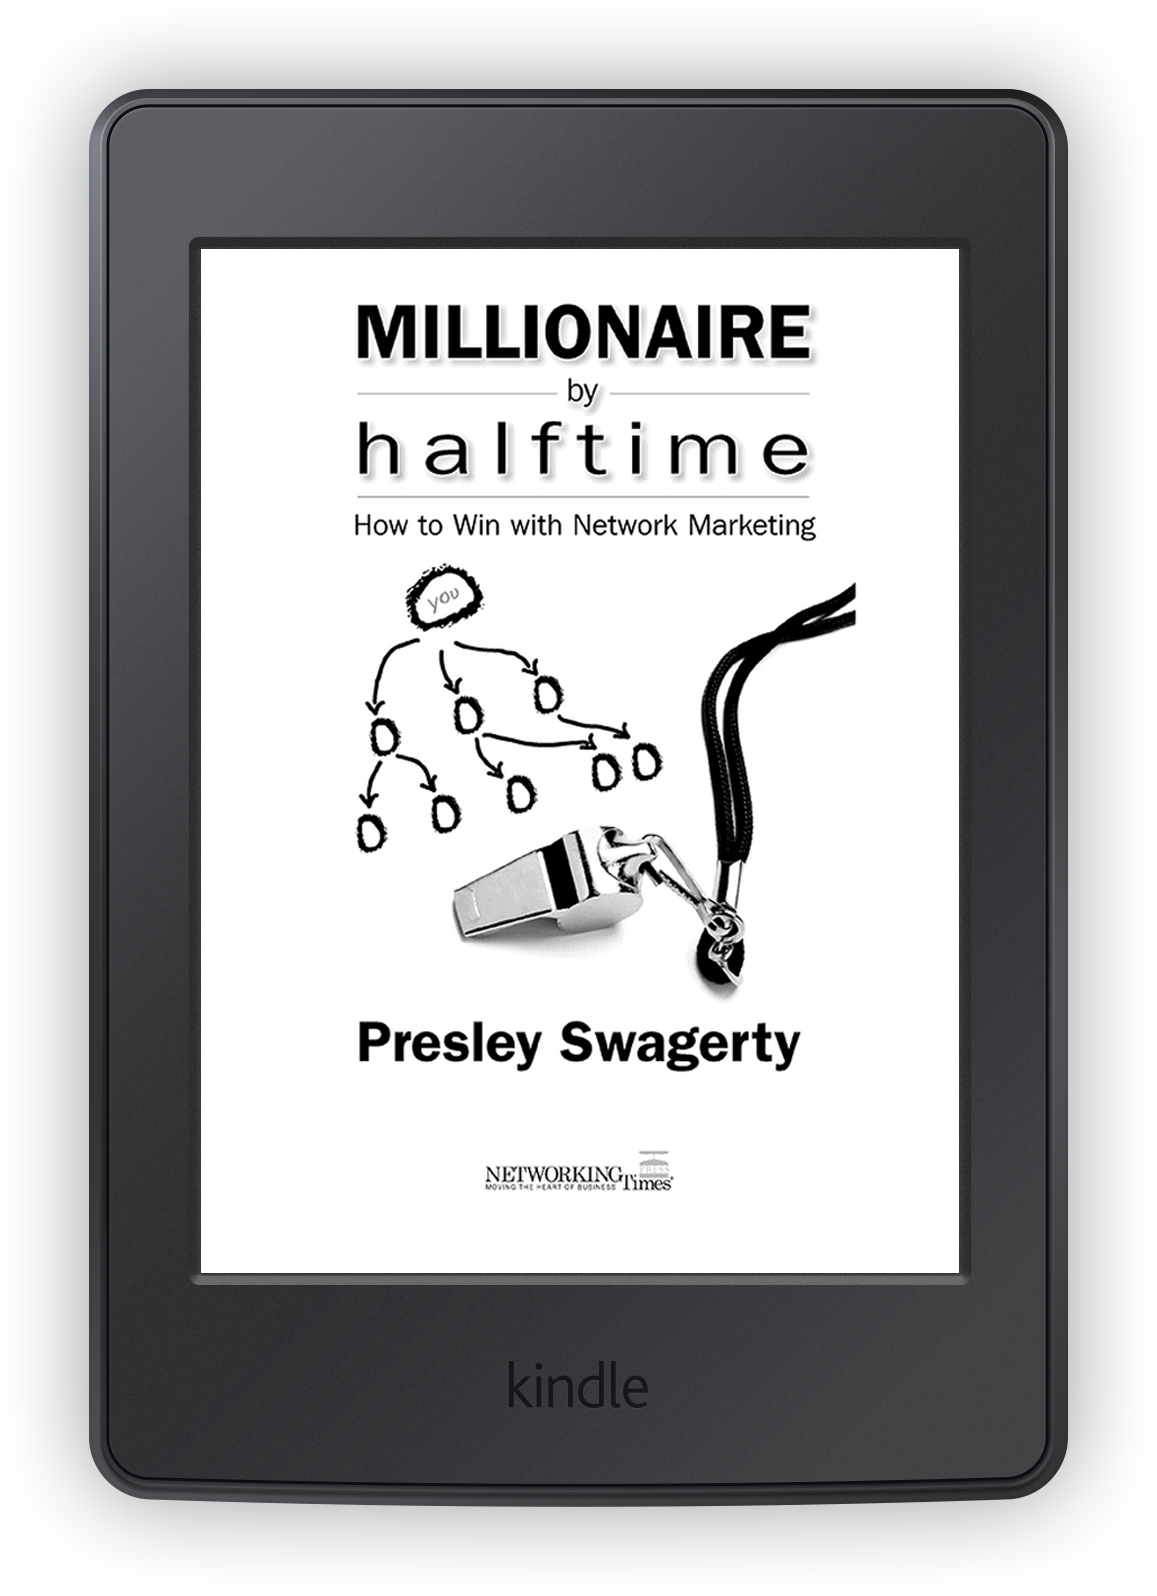 Photo of Kindle tablet with Millionaire by Halftime Book cover